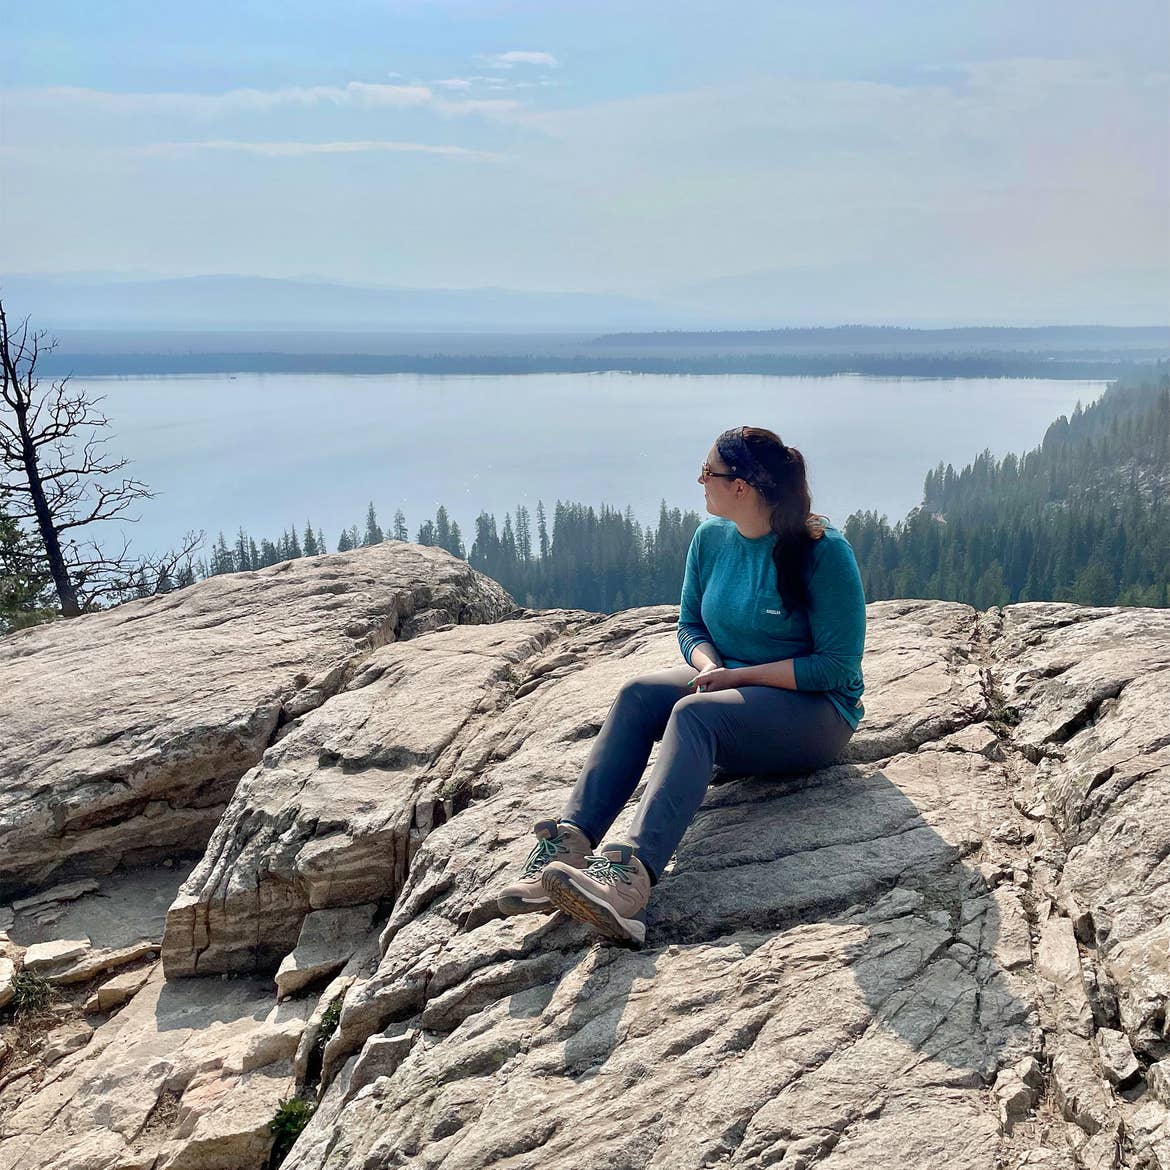 A woman in a blue, long sleeve shirt, grey pants, and brown hiking boots sits on a rock formation on a mountain overlooking a lake.